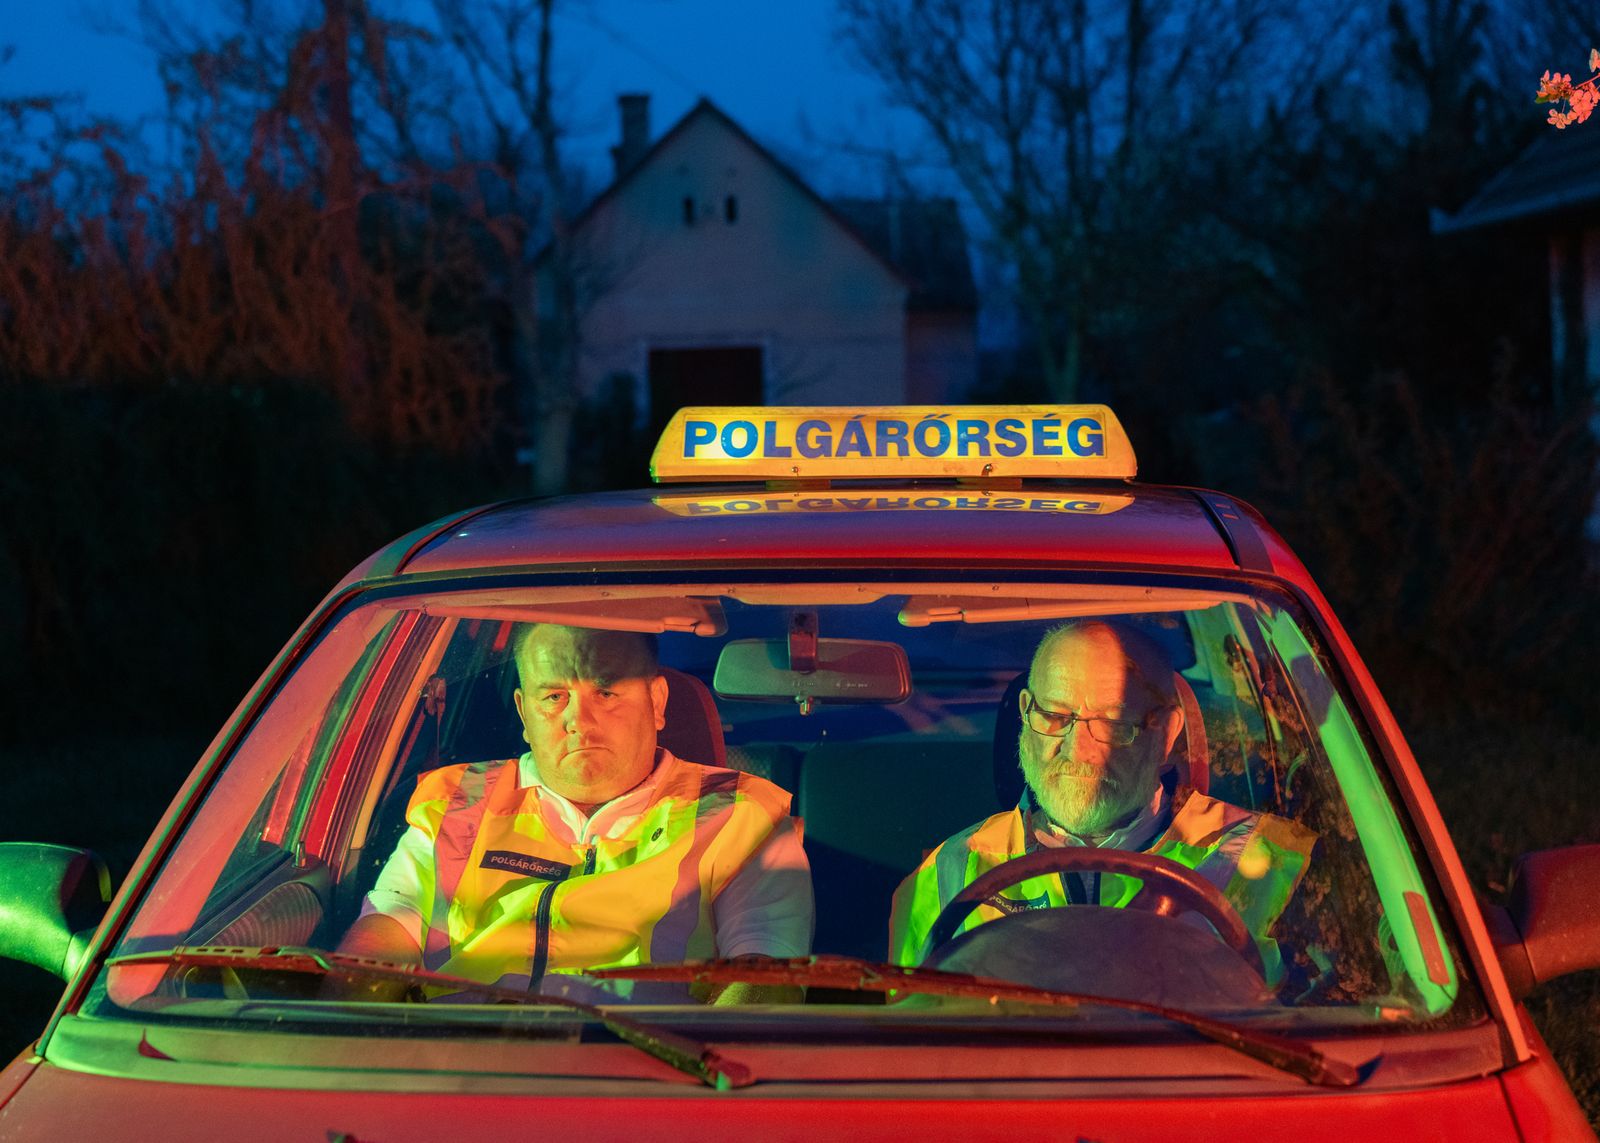 © Hahn Hartung - The Polgárőrség, a Hungarian auxiliary police, is taking care of security in the villages